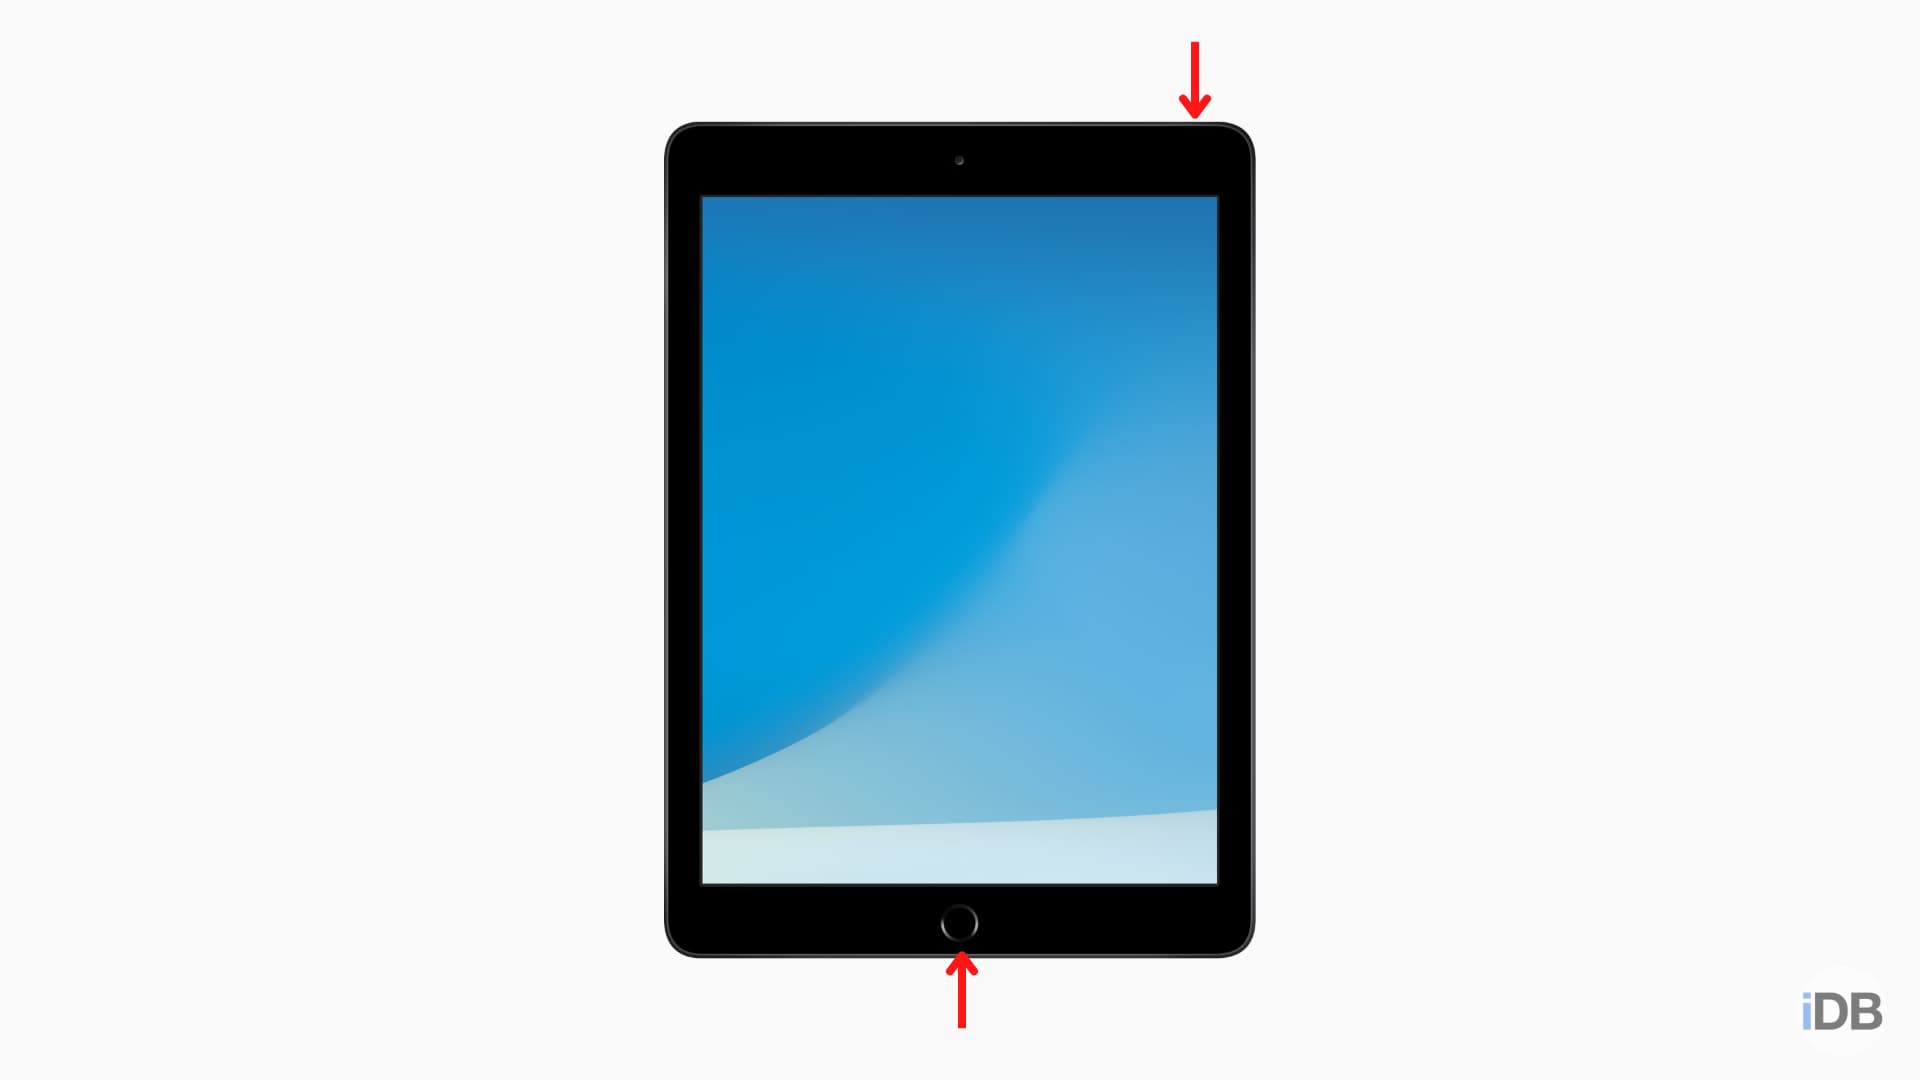 iPad with Home button showing which buttons to press to enter recovery mode